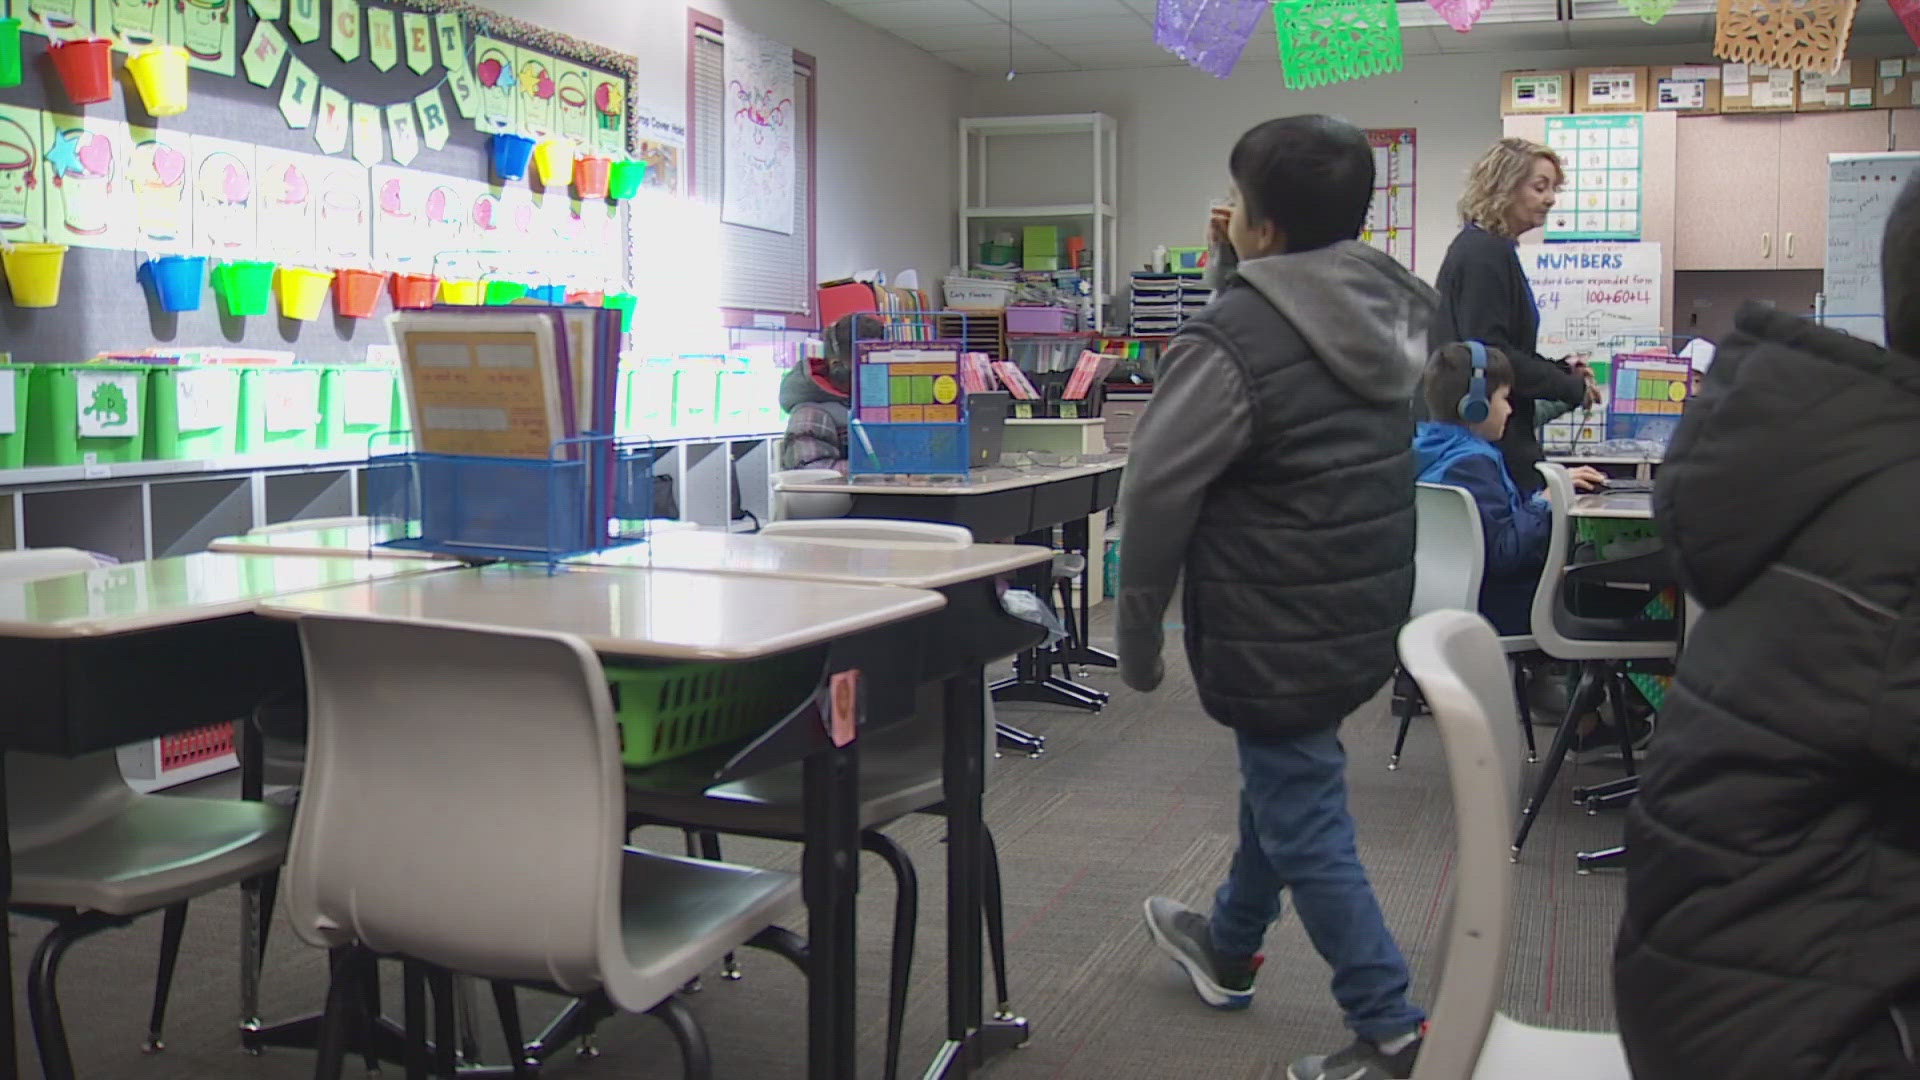 Student aid is linked to enrollment, but hundreds of new students in Tukwila arrived after budgets were set. An elementary school shares its approach with KING 5.